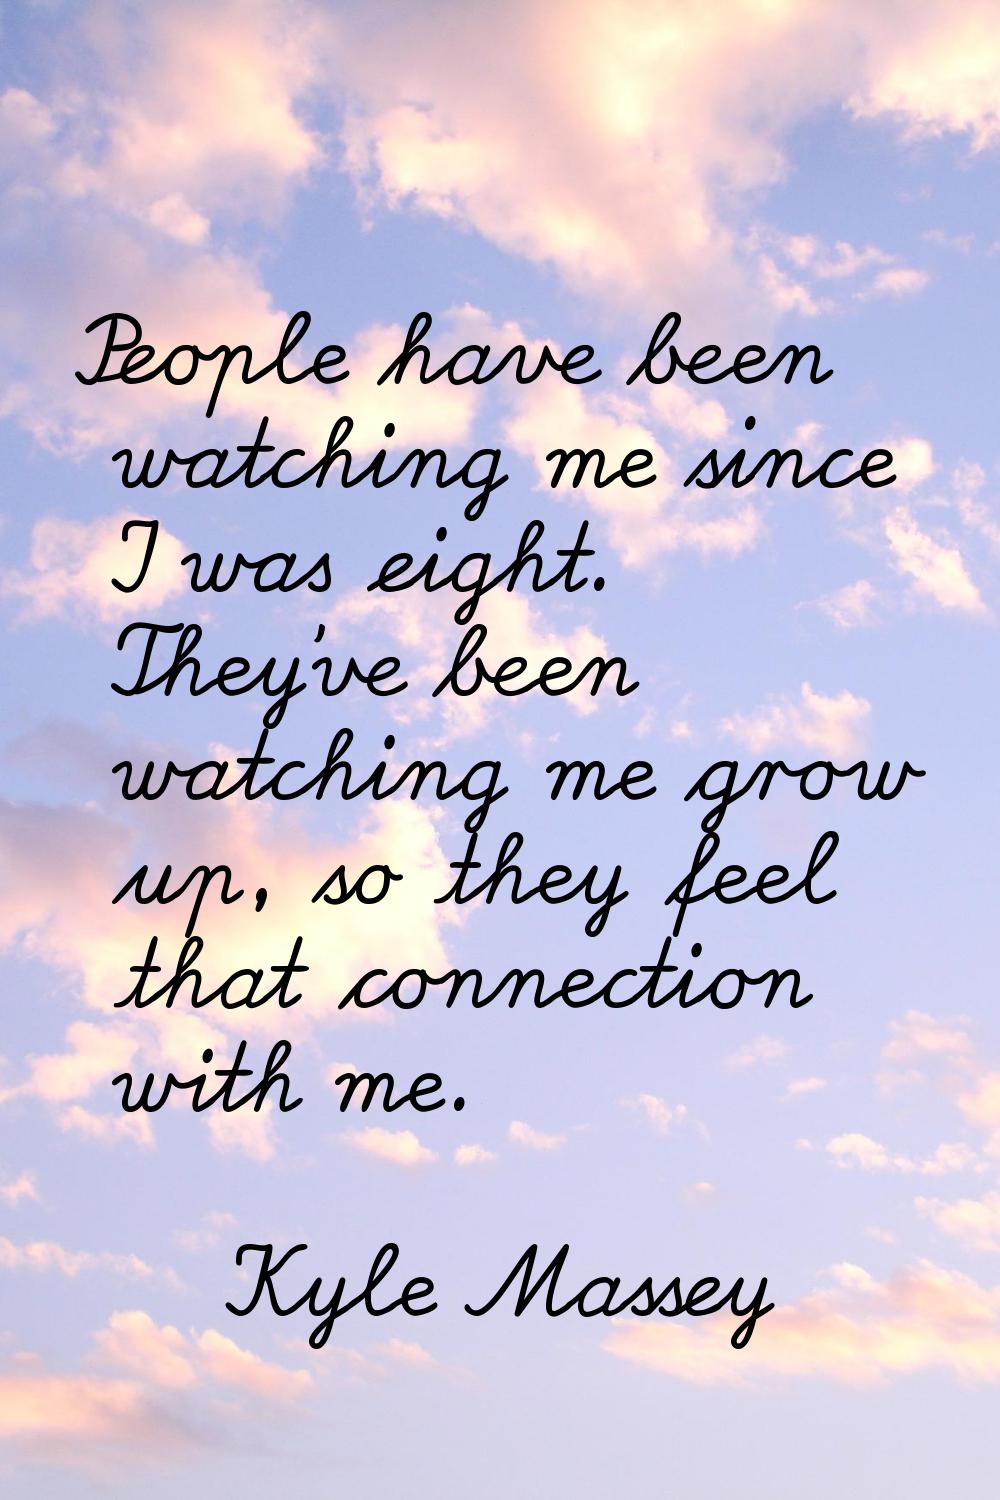 People have been watching me since I was eight. They've been watching me grow up, so they feel that